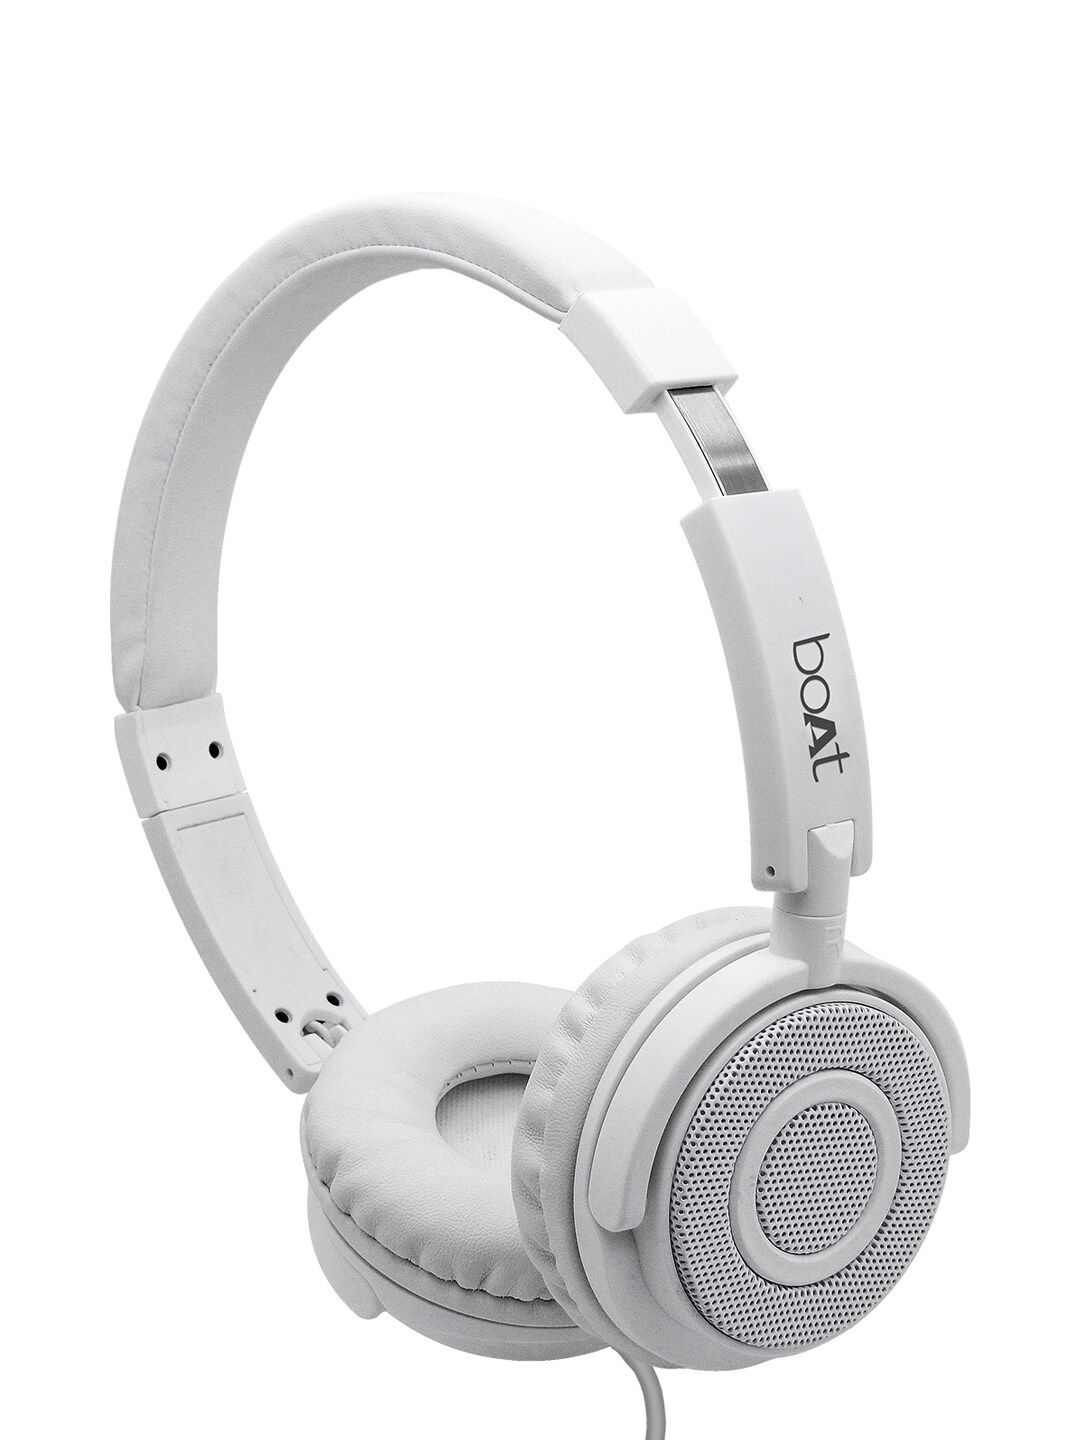 boAt BassHeads 900 White Wired Headset with Enhanced Bass & Lightweight Foldable Design Price in India